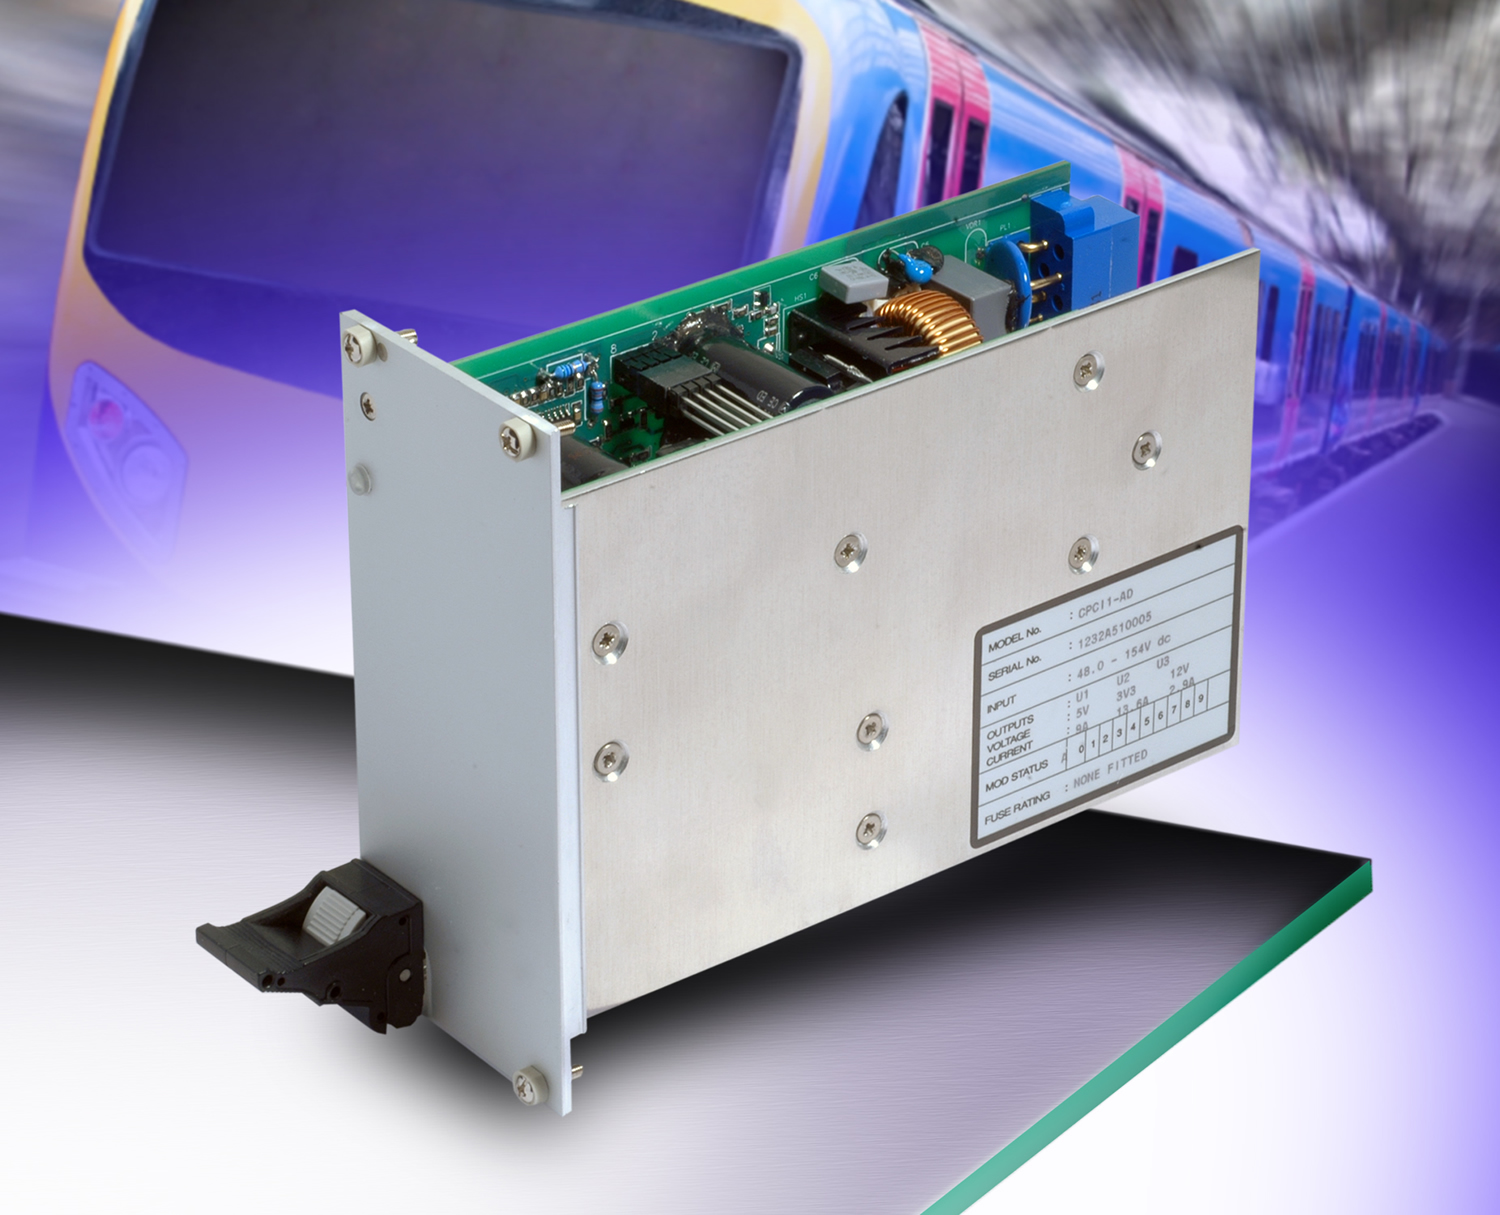 Martek Power offers compact PCI power supply for on-board rail use